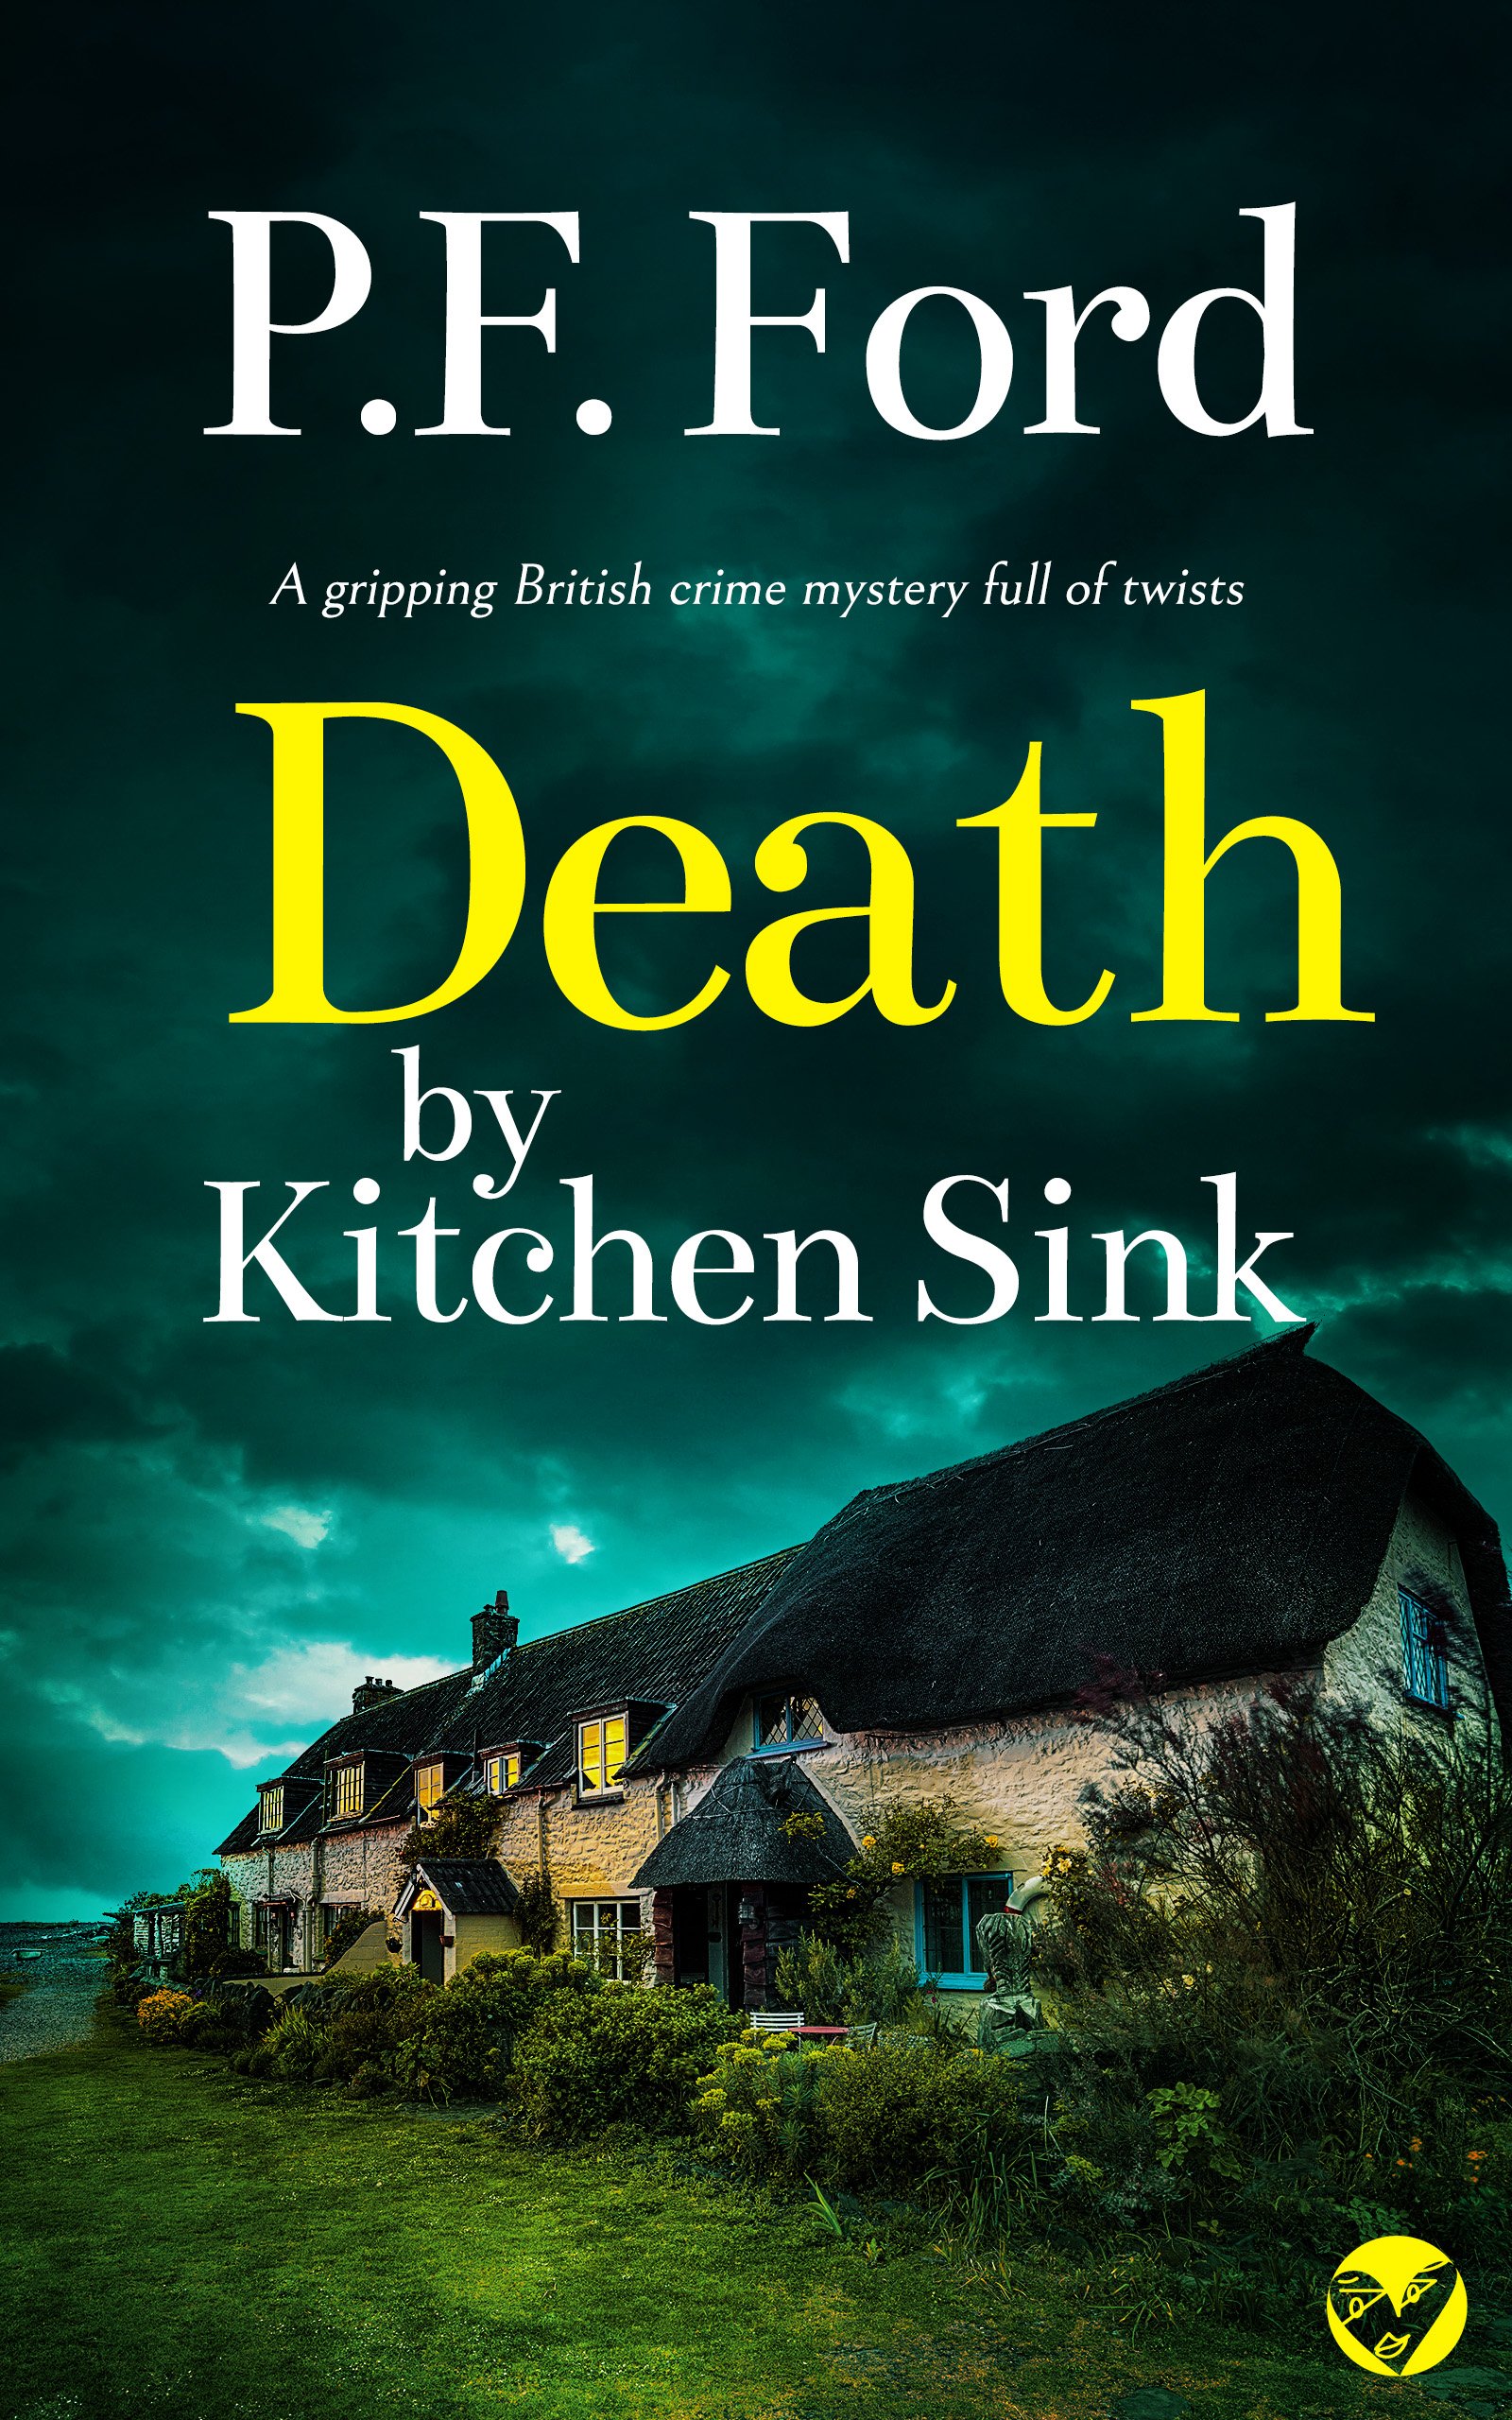 DEATH BY KITCHEN SINK cover publish.jpg